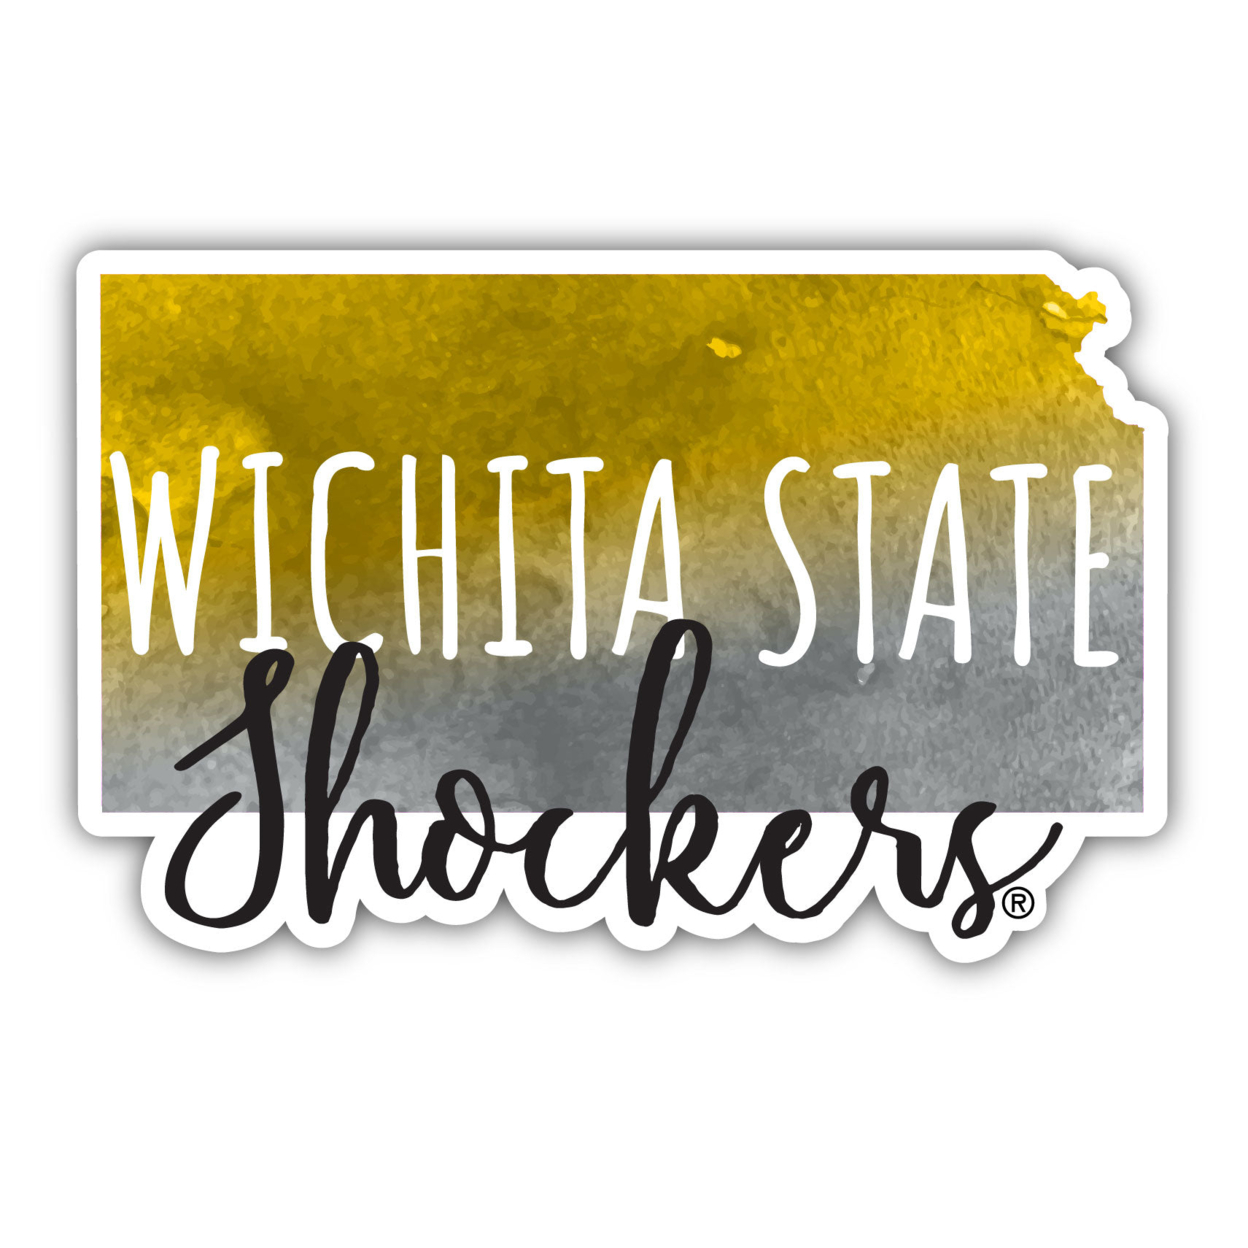 Wichita State Shockers Watercolor State Die Cut Decal 2-Inch